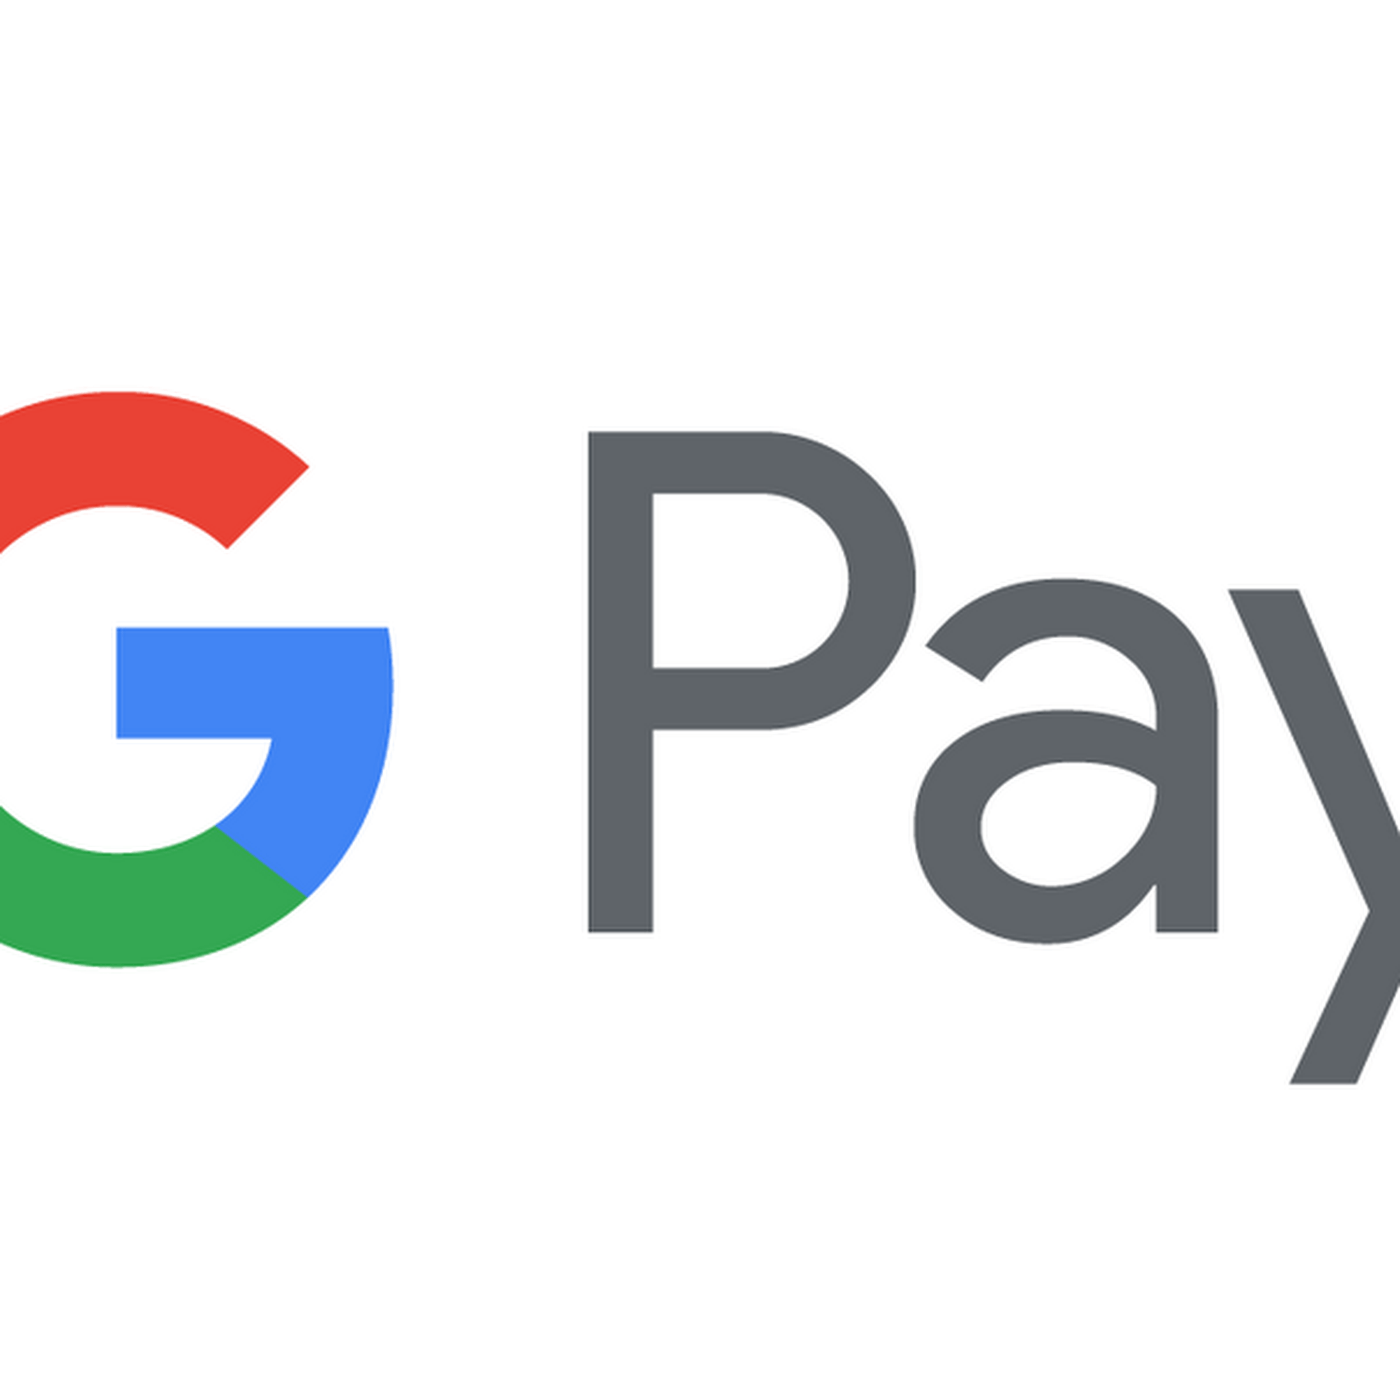 Android Pay Logo - Google is combining Android Pay and Google Wallet into one service ...